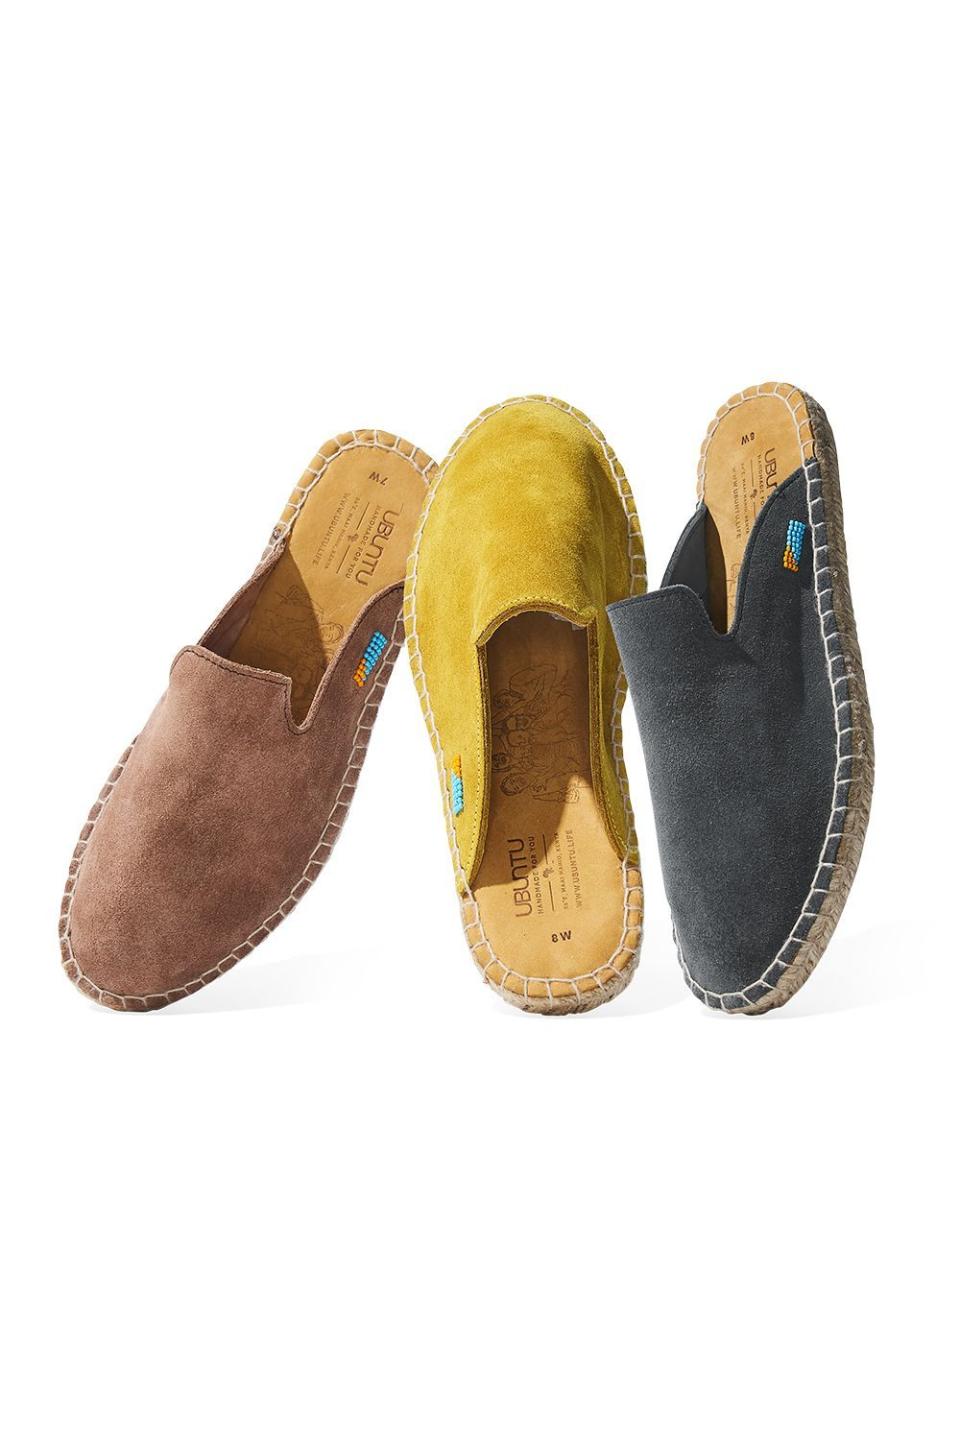 40) Handmade Suede Espadrille Mule Shoes for Women